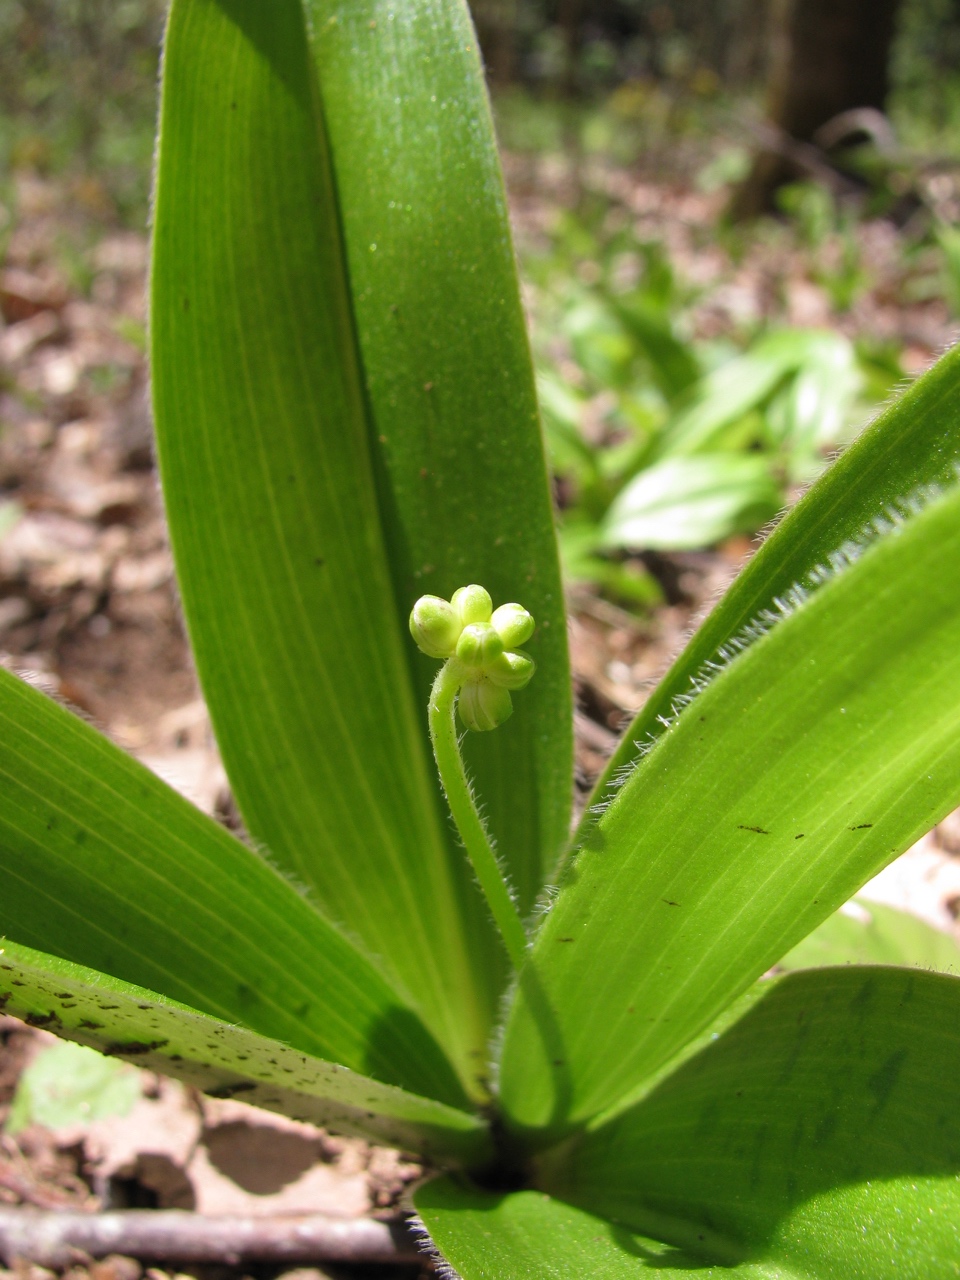 The Scientific Name is Clintonia umbellulata. You will likely hear them called Speckled Wood Lily. This picture shows the Strongly ciliated leaf margins of Clintonia umbellulata